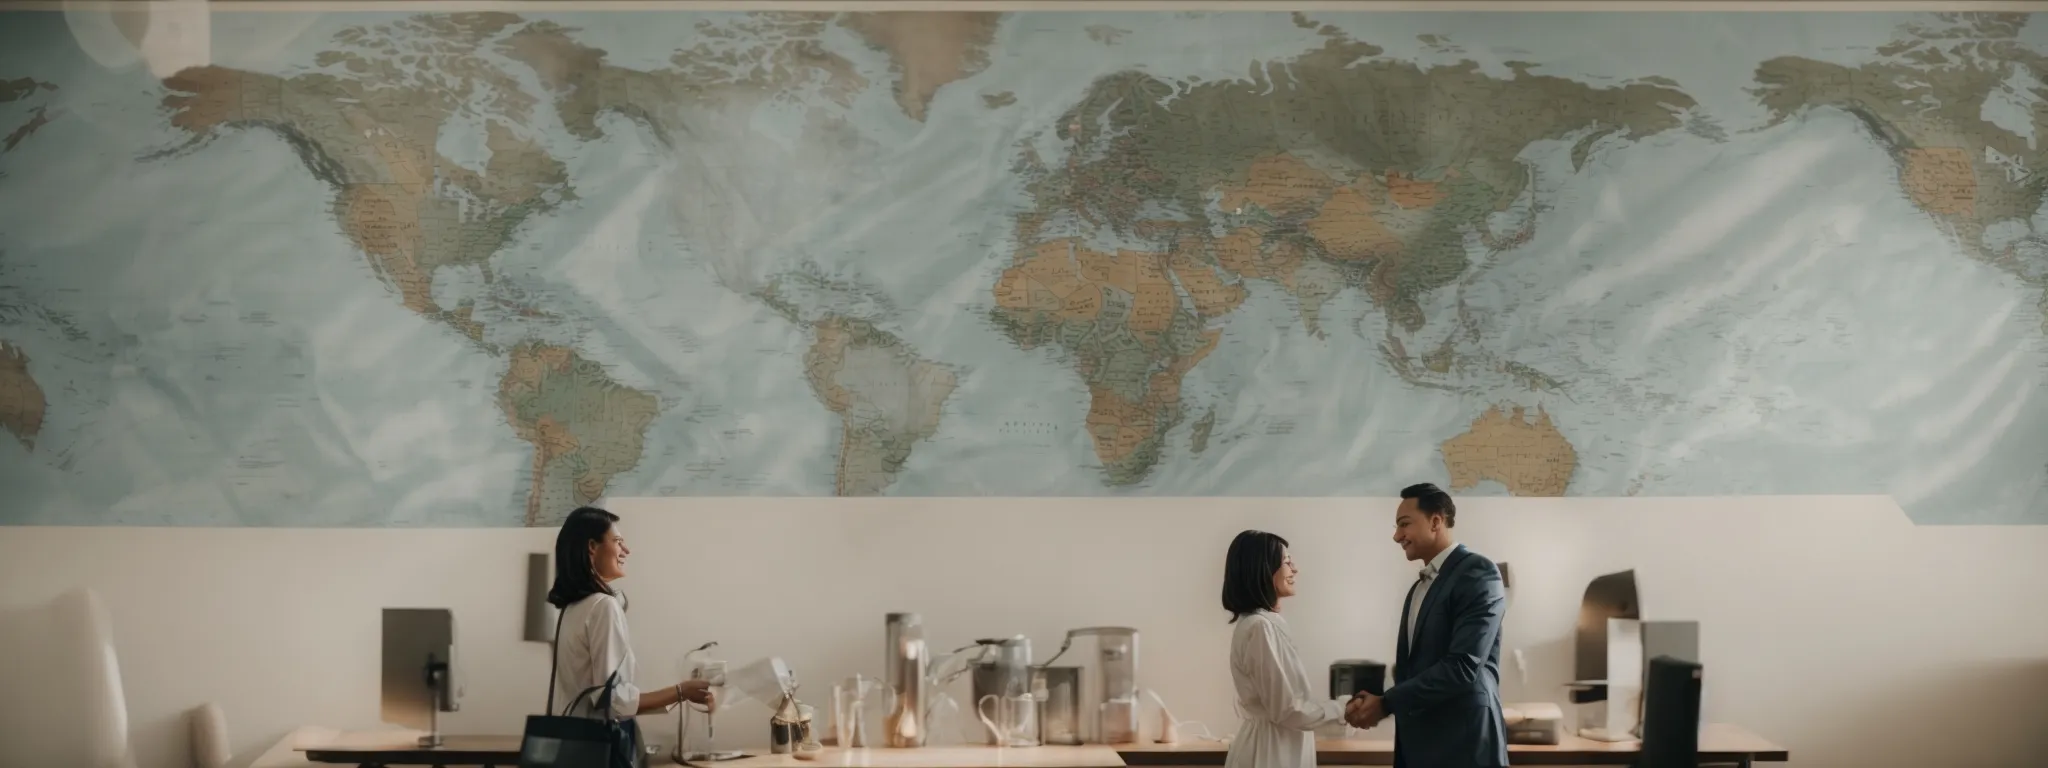 a marketer shakes hands with a partner across a world map-covered table, symbolizing global link building connections.